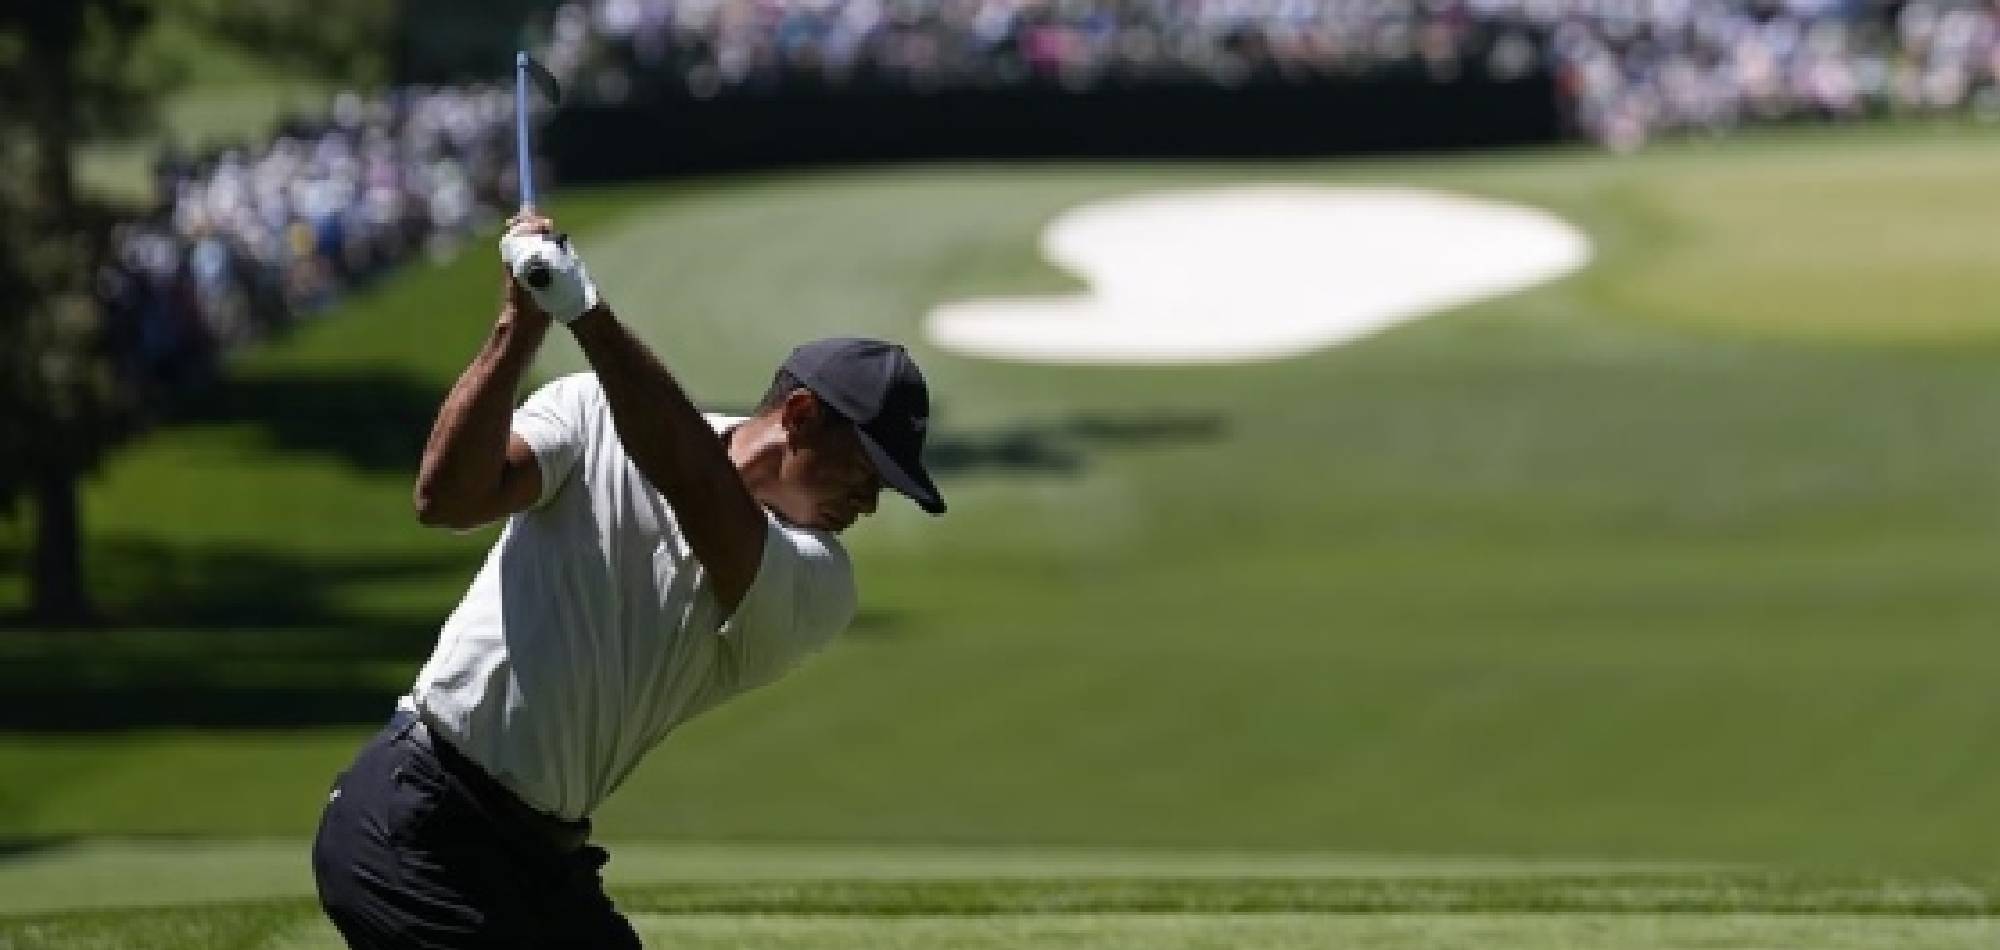 Tiger Woods on the course for 100th round at the Masters after getting swing tips from son Charlie